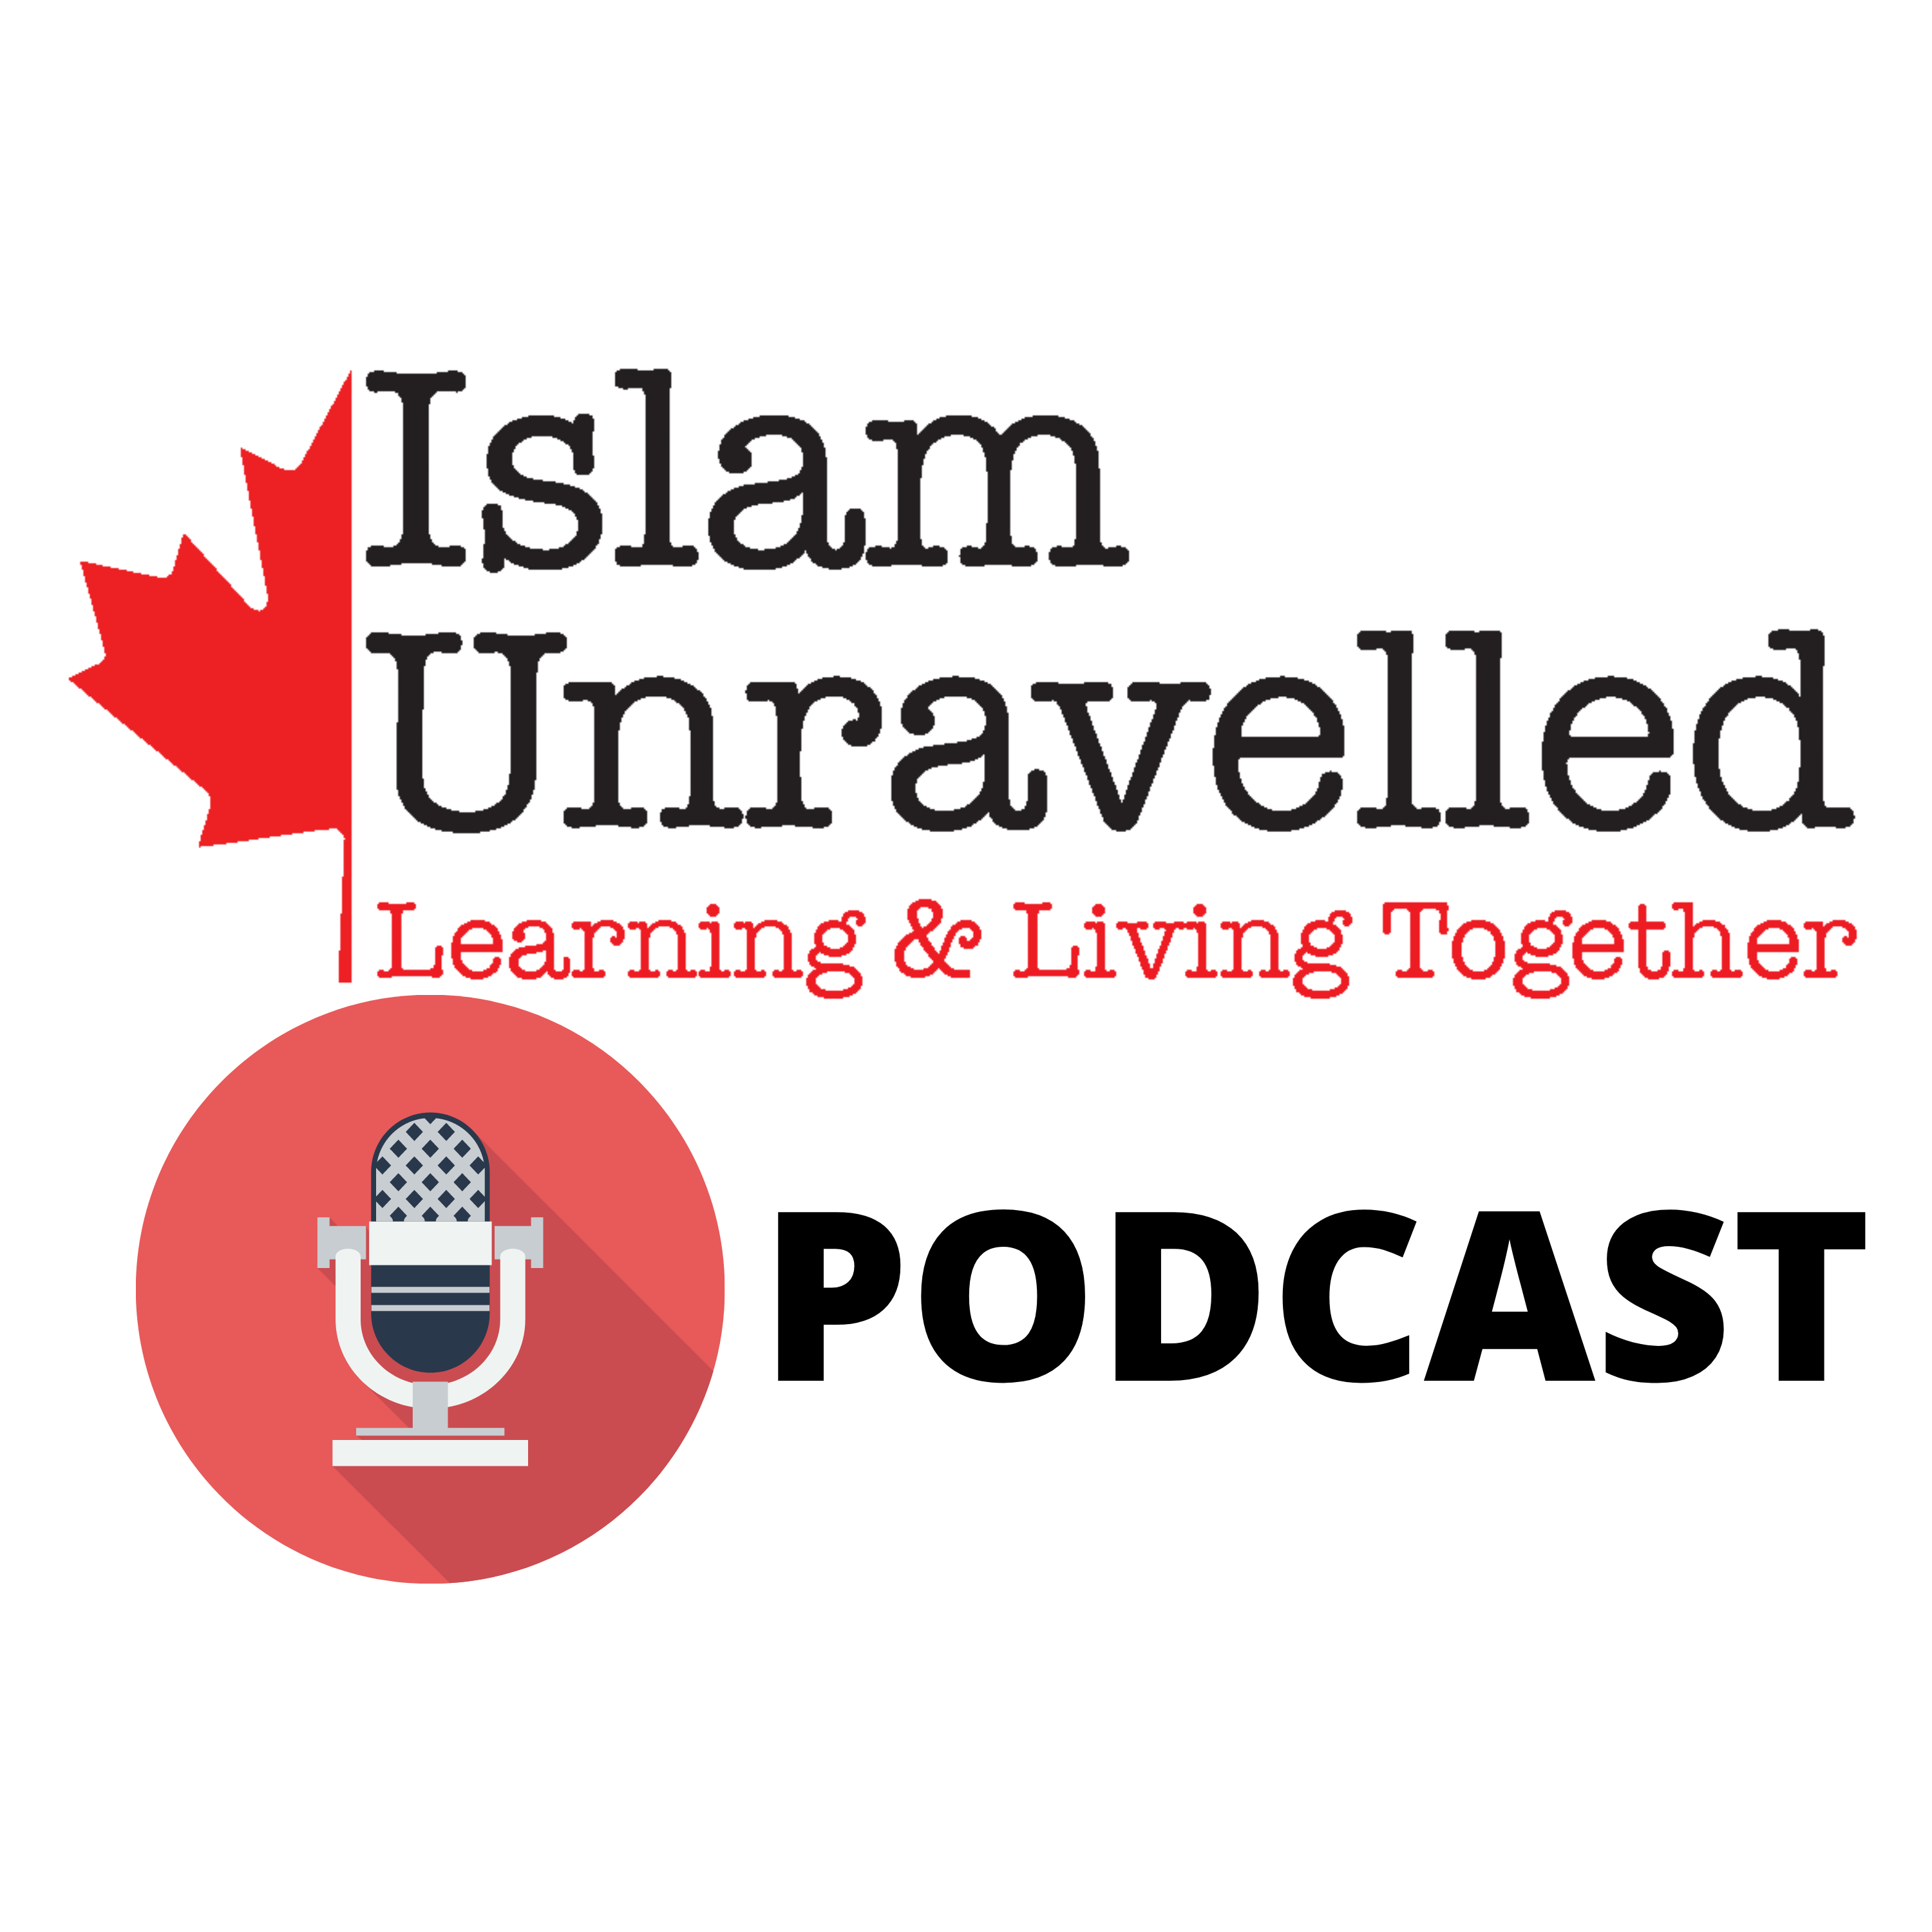 Metro Vancouver Transit Police with Cst. Shiraaz Hanif - Islam Unravelled